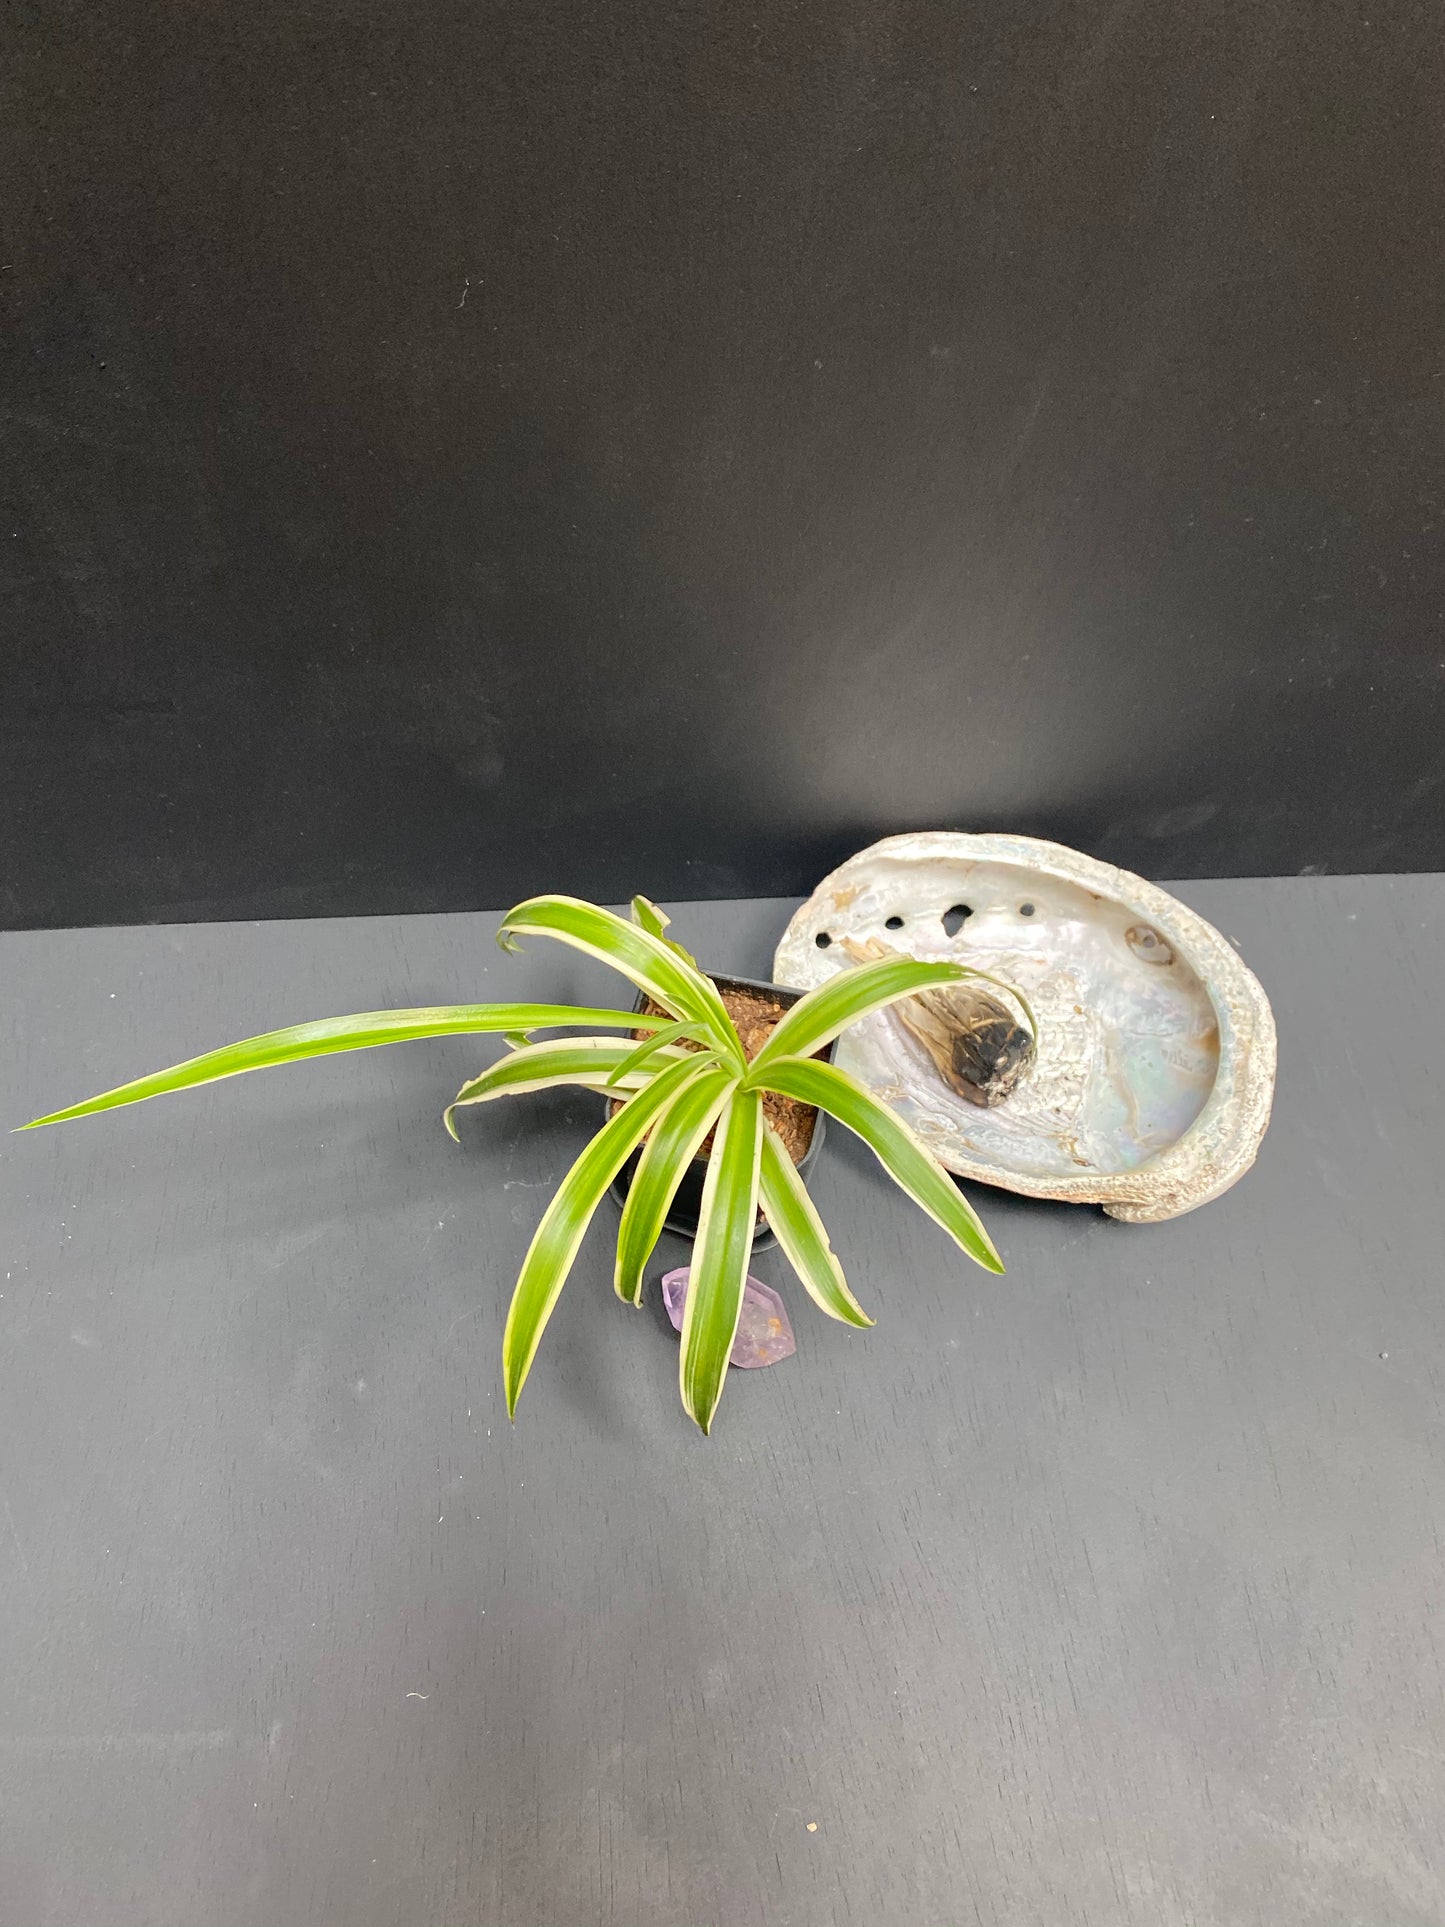 Spider Plant in Small Black Pot with Saucer